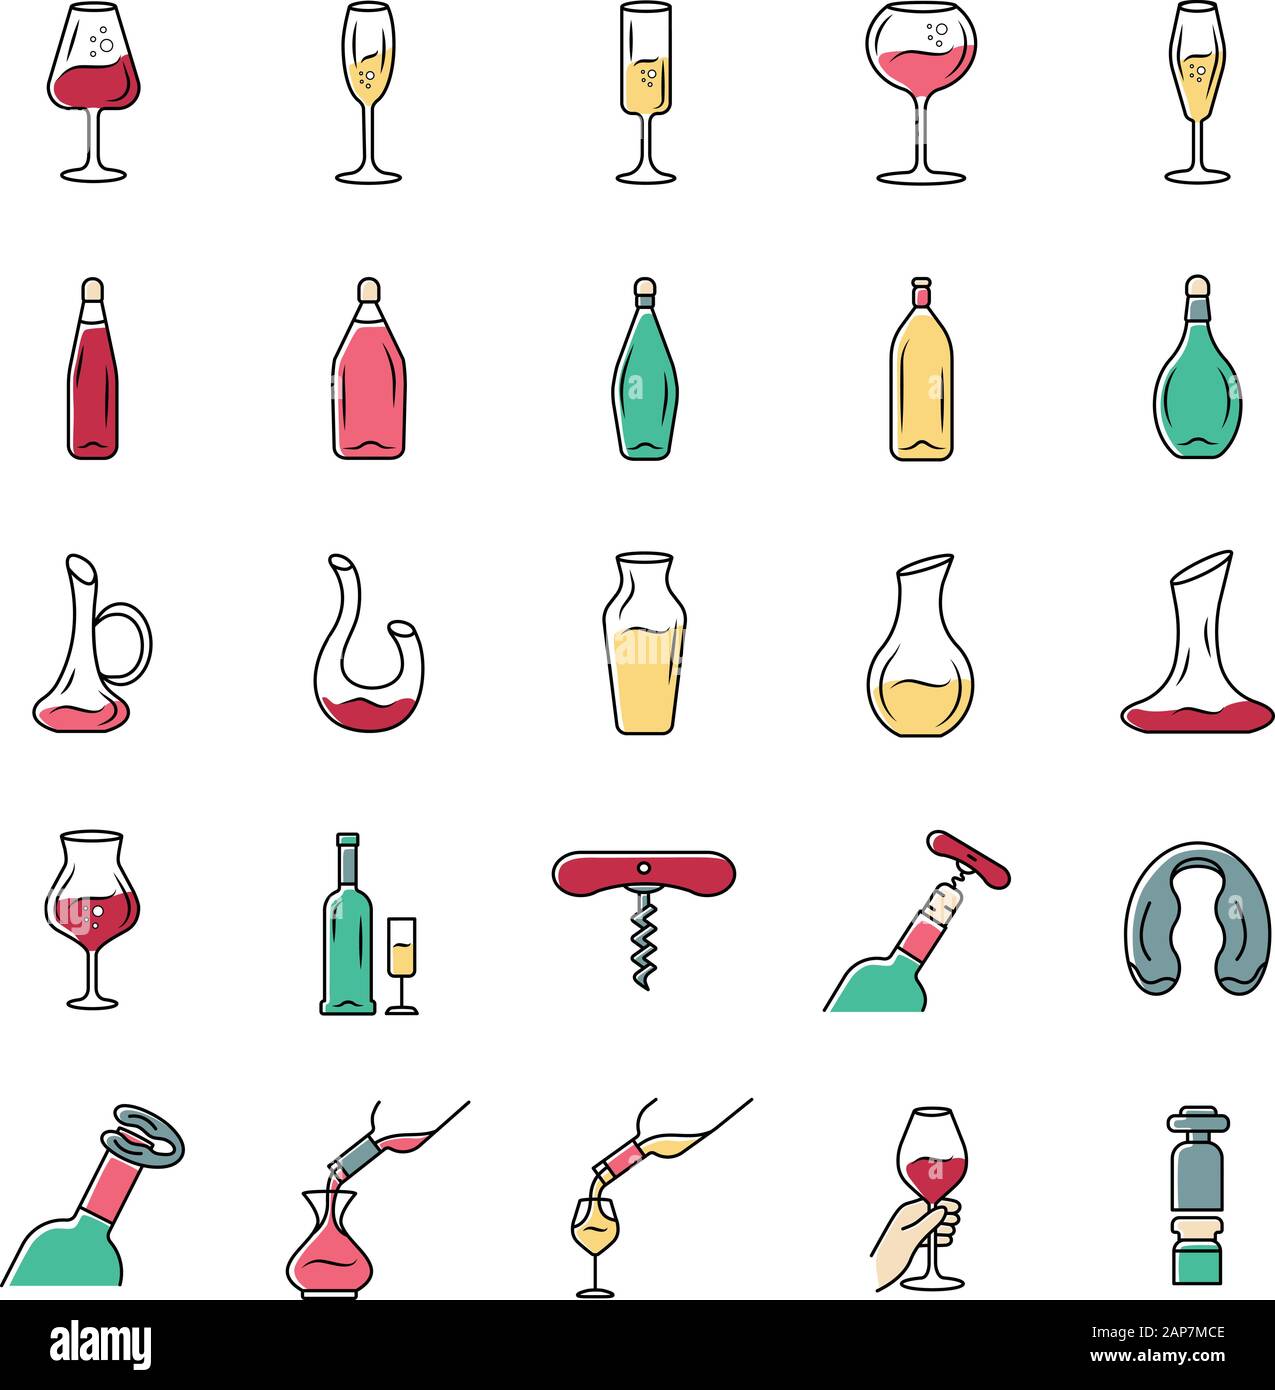 Wine and wineglasses icons set. Different types of glassware and alcohol beverages. Decanters, bottles, barman tools. Aperitif drinks, cocktails. Isol Stock Vector